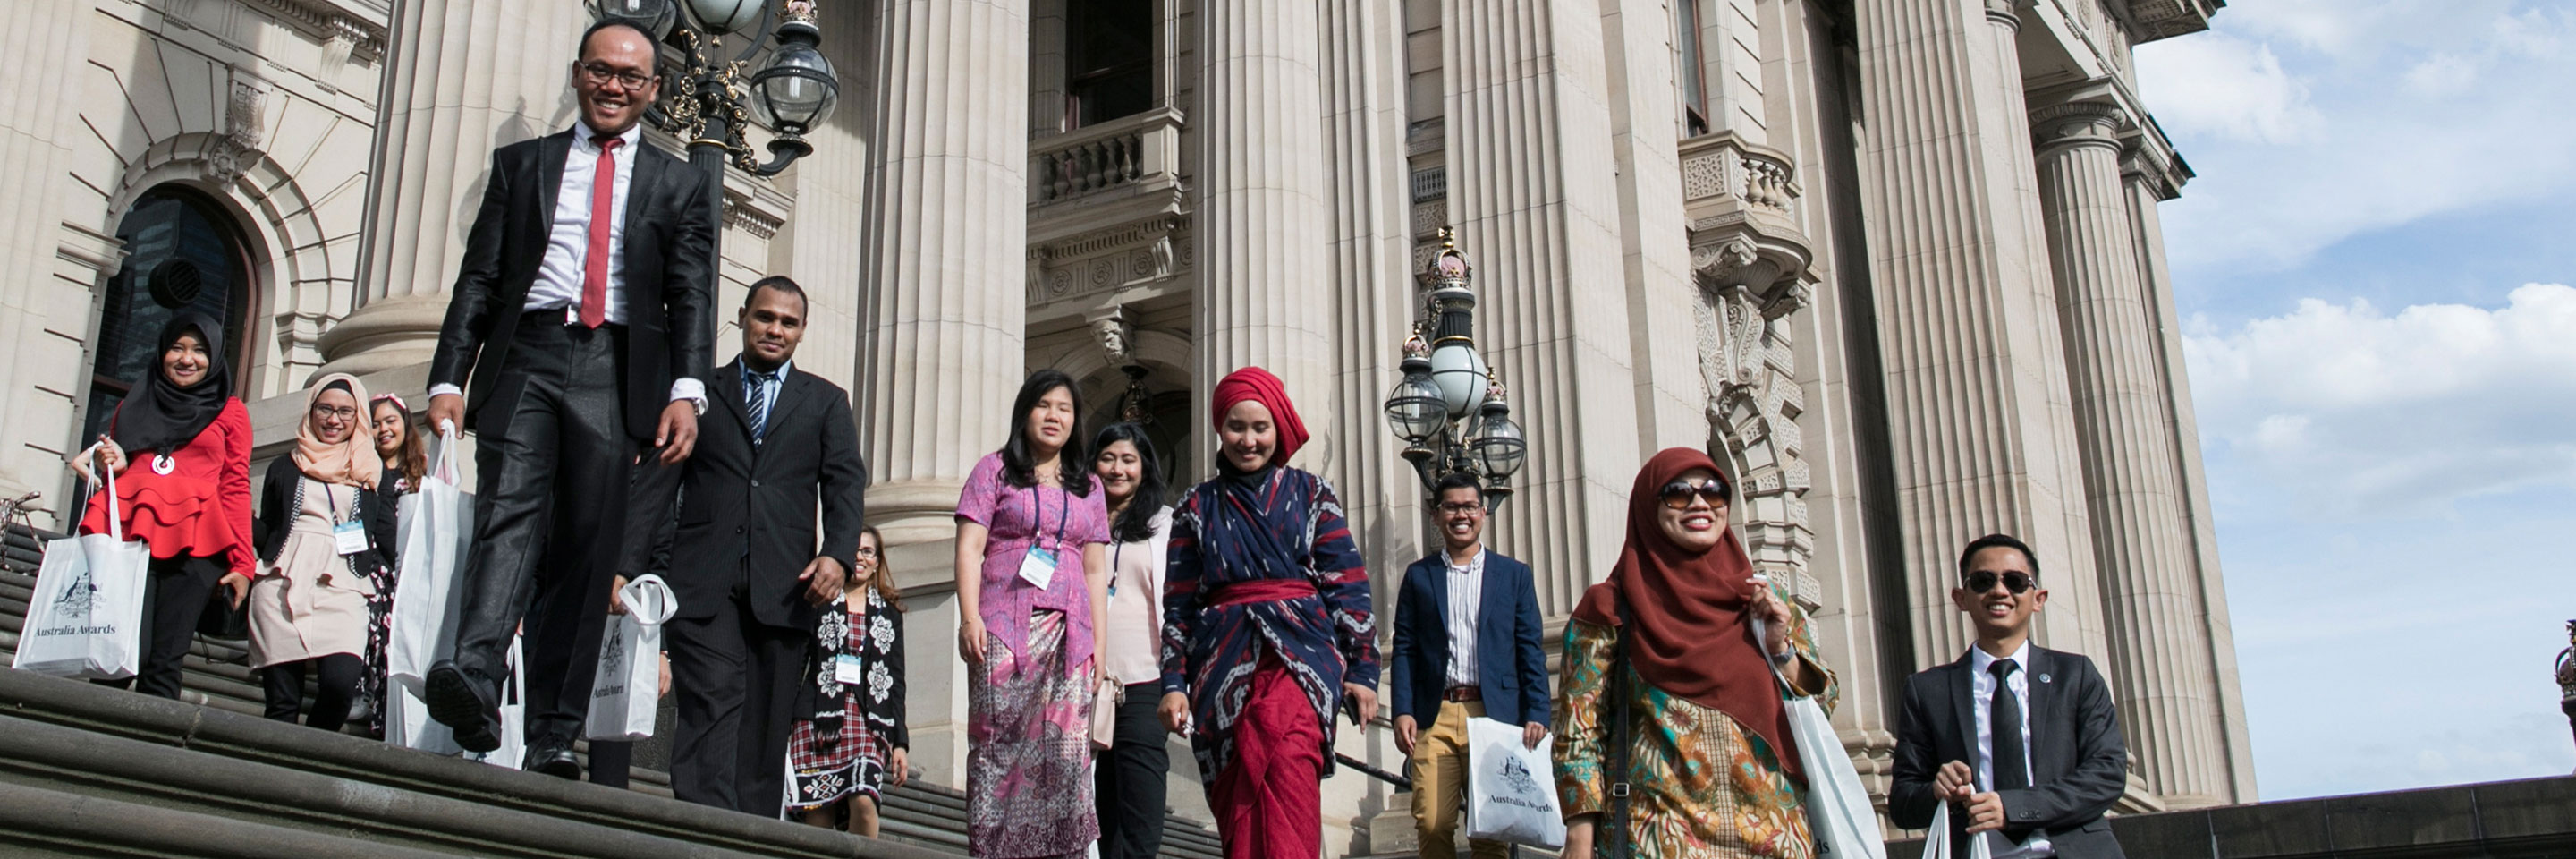 Australia Awards graduating scholars gather in front of the Parliament House in Melbourne for an end of year celebration before returning to Indonesia.